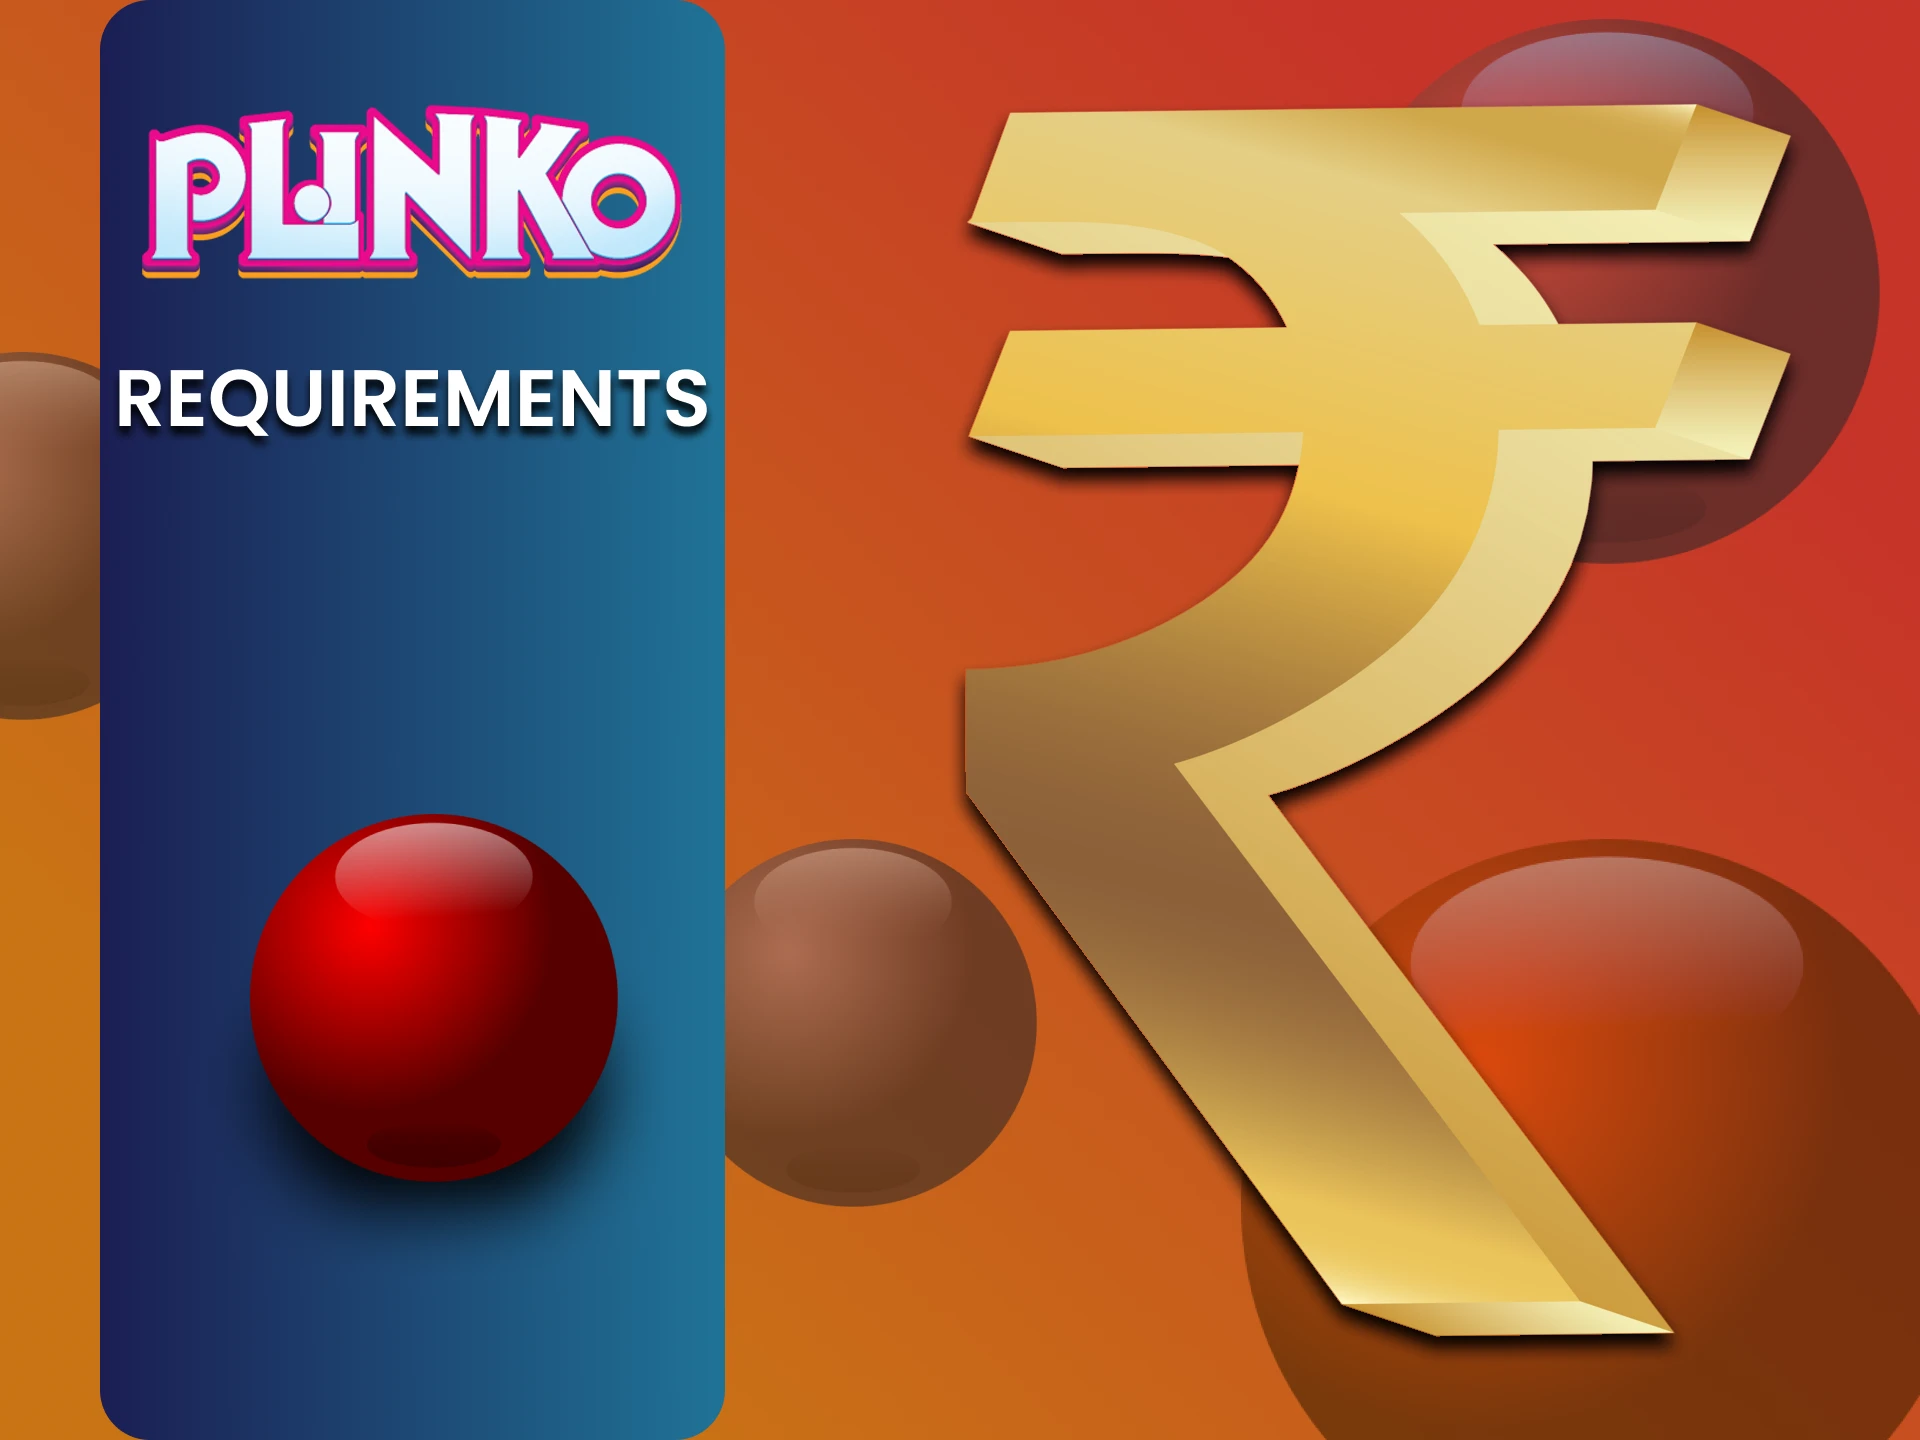 Review the withdrawal requirements for Plinko.